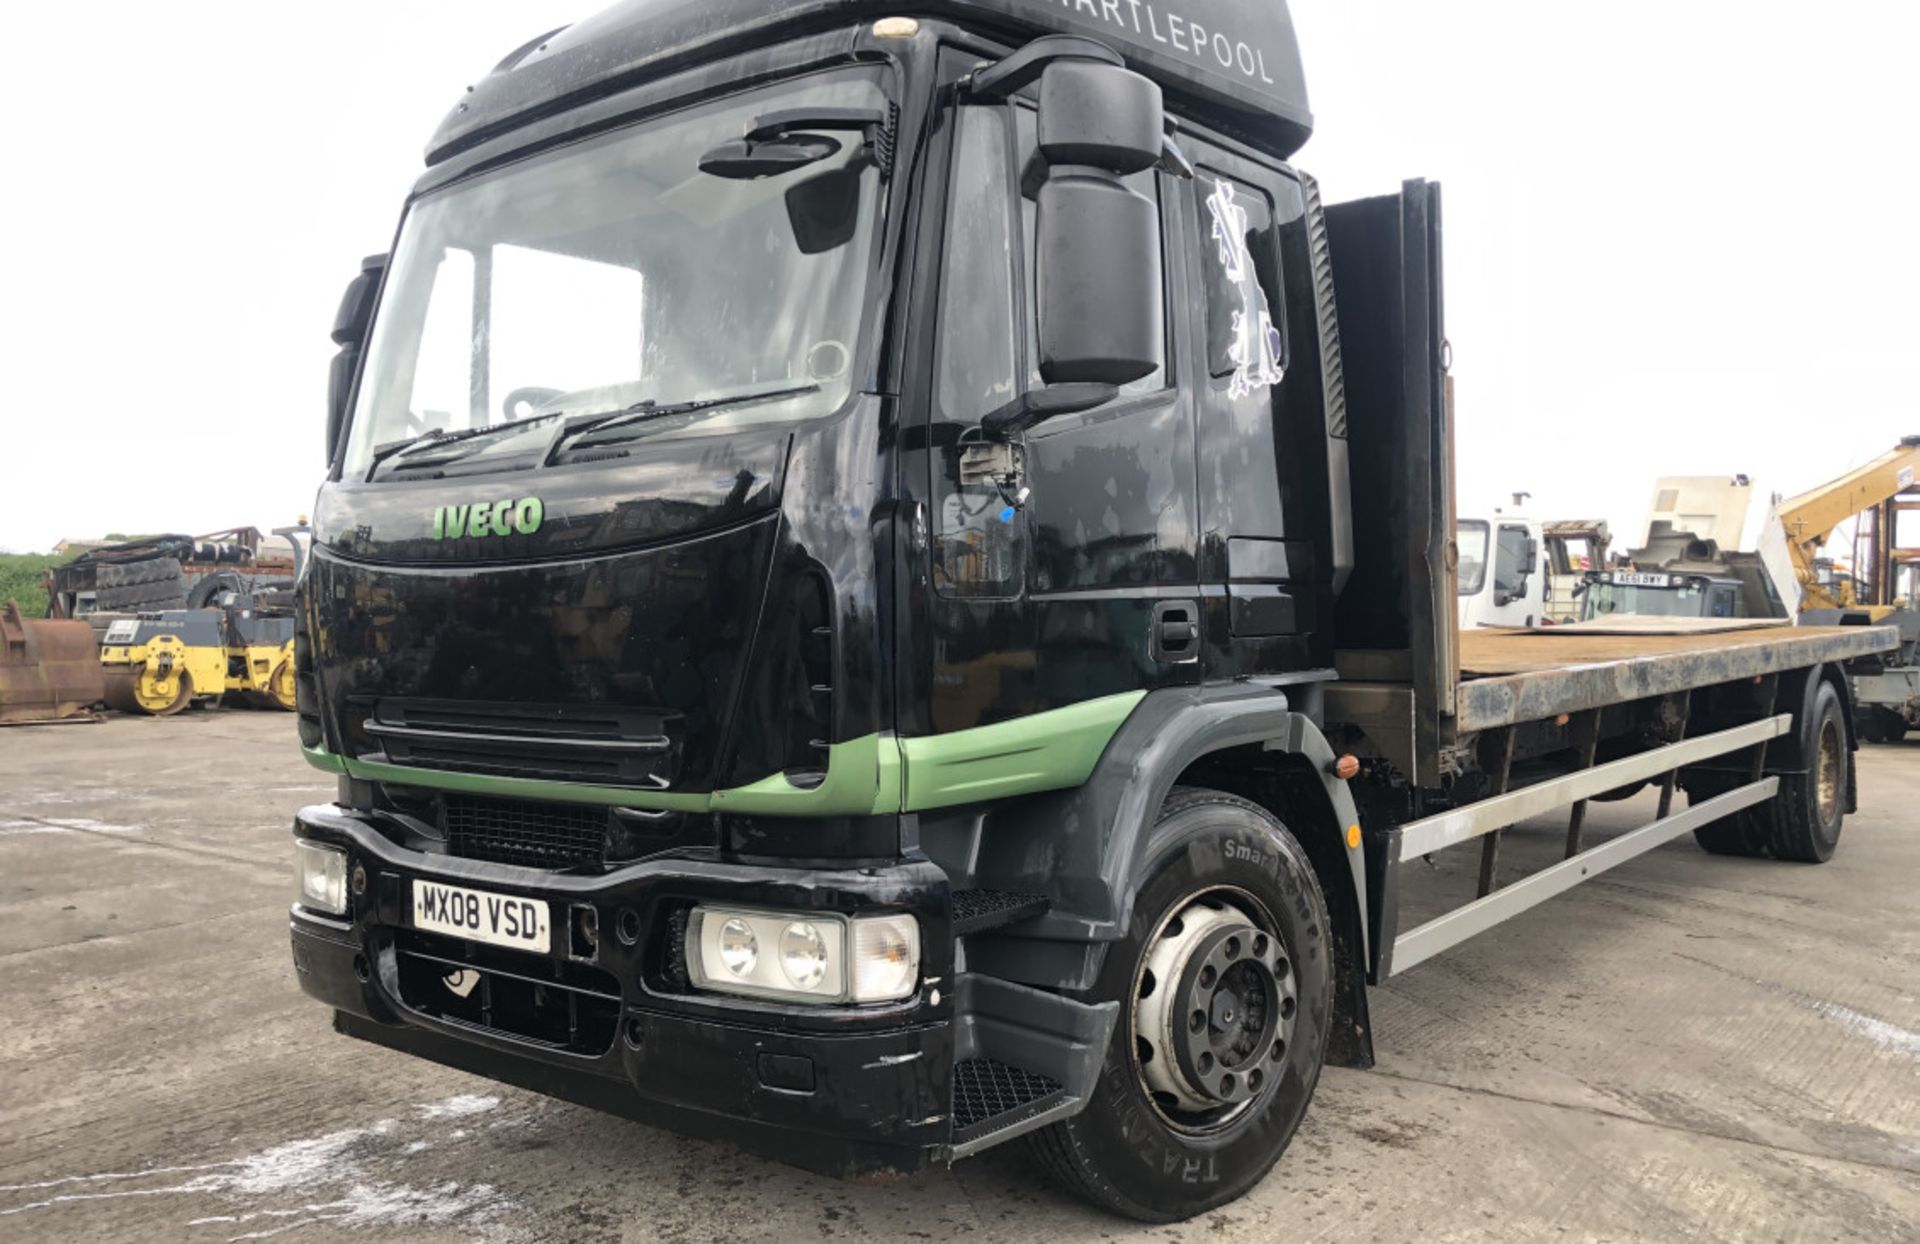 IVECO 18 E 240 FLAT BED 18 TON TRUCK - Image 8 of 8